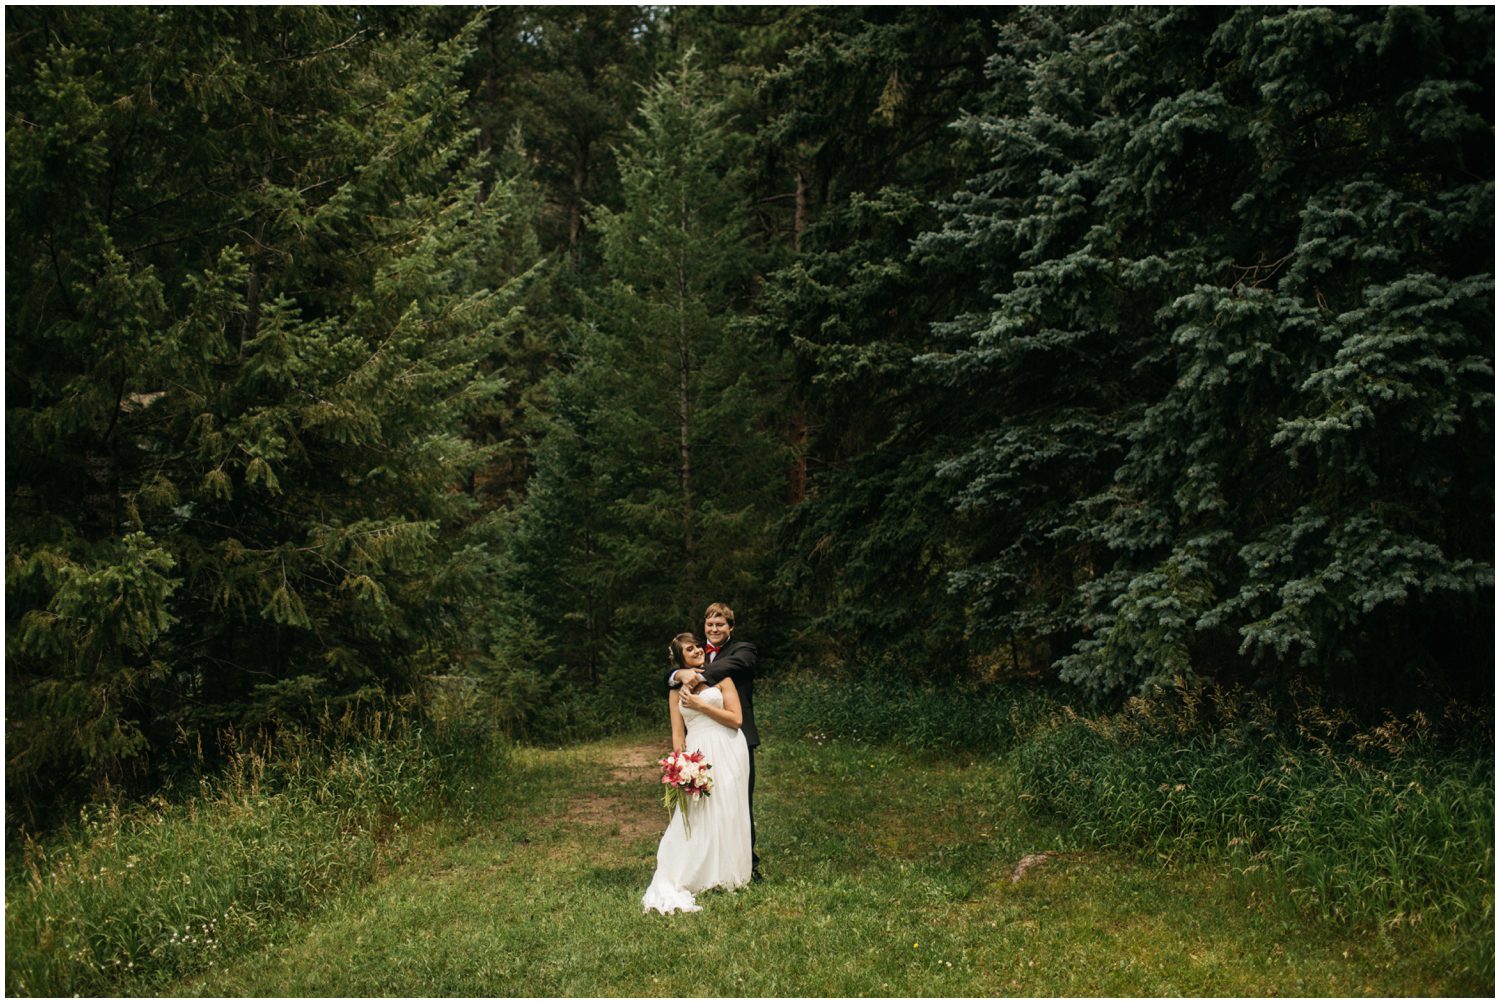 Evergreen Colorado Wedding Photographer, The Church of Transfiguration, Colorado Wedding, Colorado Wedding Inspiration, Colorado, Evergreen Colorado, Wedding Inspiration, Bride and groom, Bride and groom posing, Unposed, Unposed Prompts, Show me your you